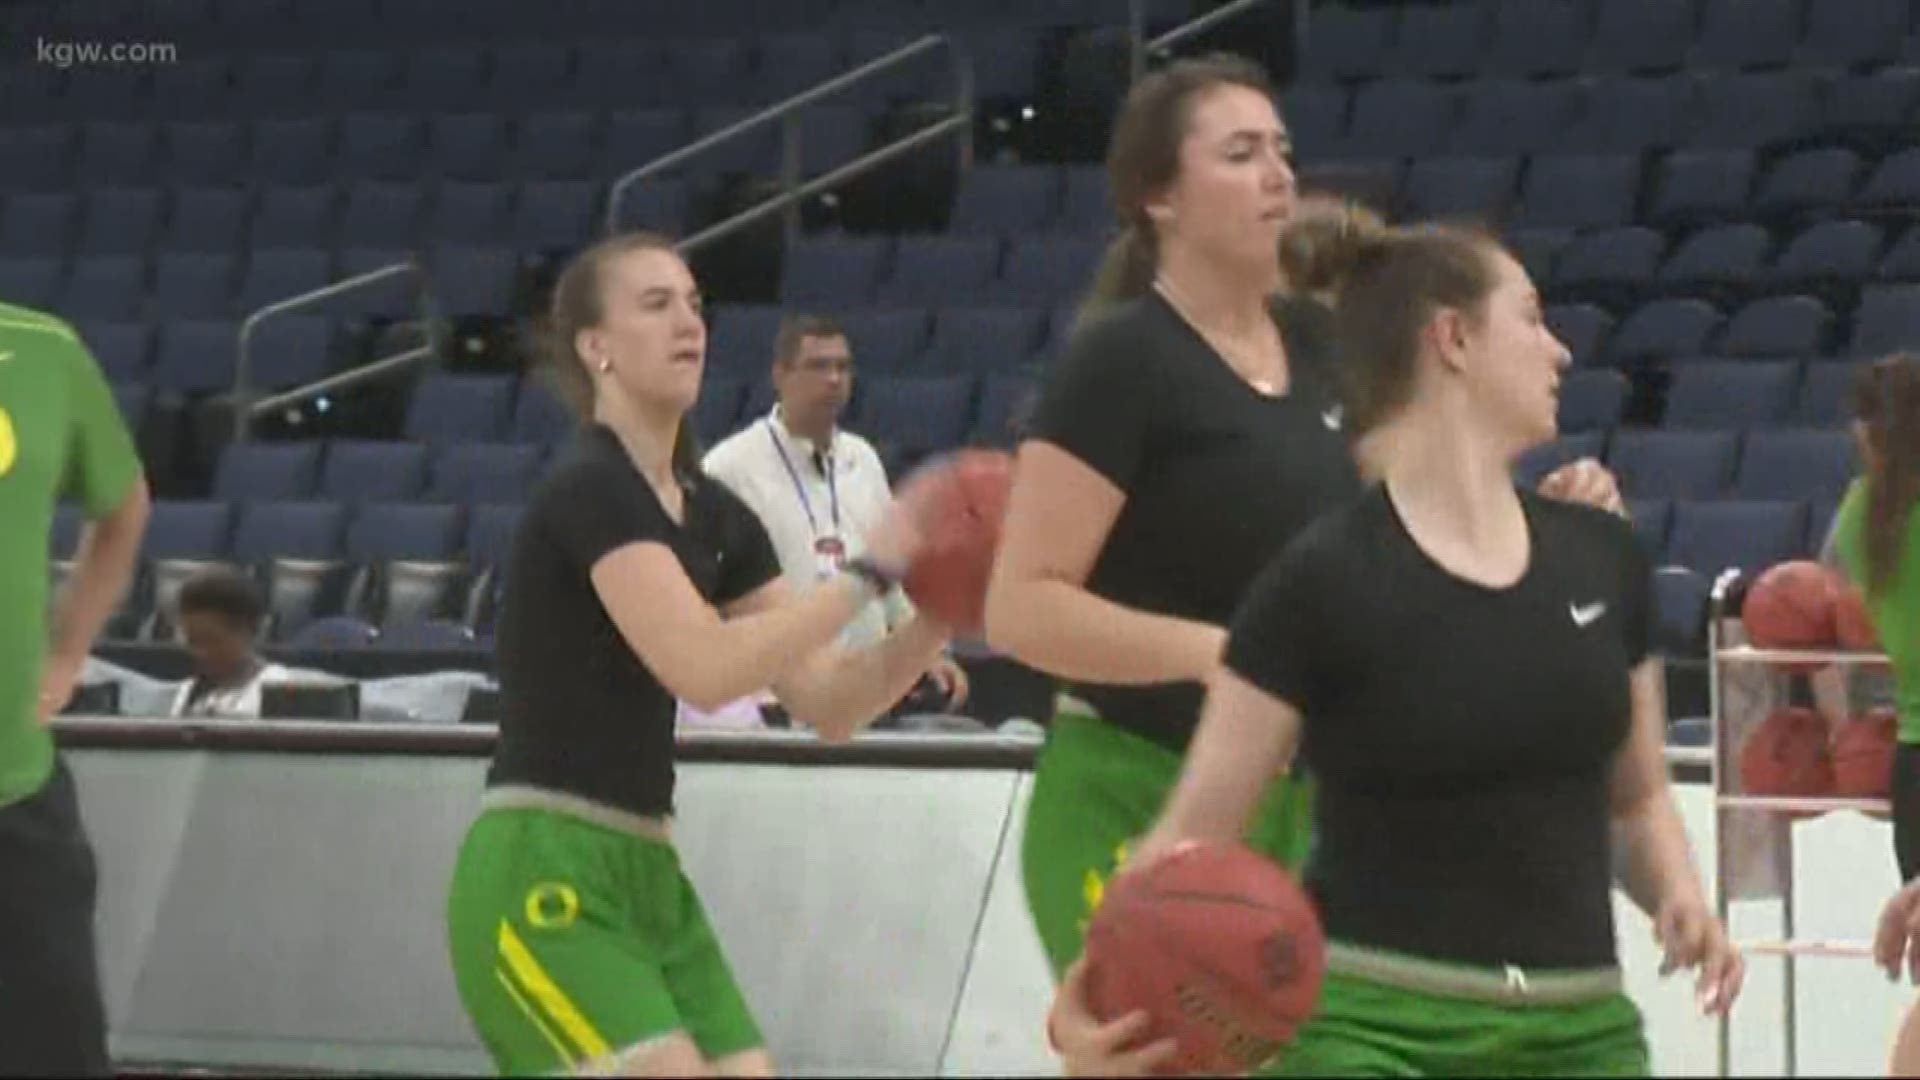 At some point, a basketball program finally reaches the top to win a championship and one analyst tells KGW sports reporter Orlando Sanchez says it may very well be the Ducks' turn.